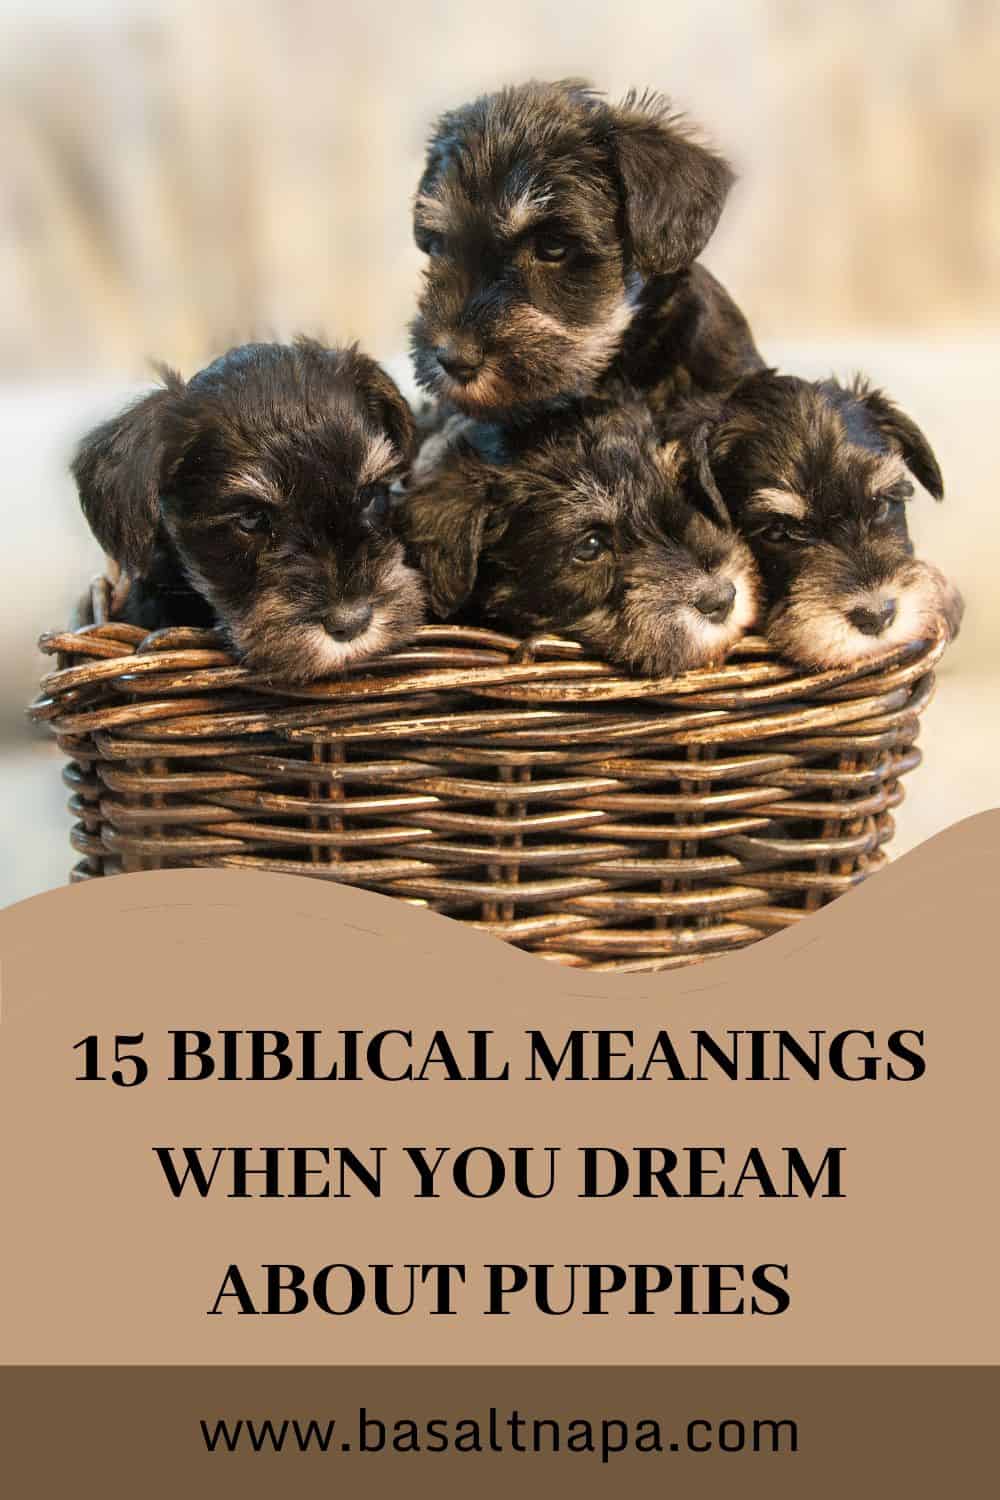 Biblical Explanation of Puppies in your Dreams